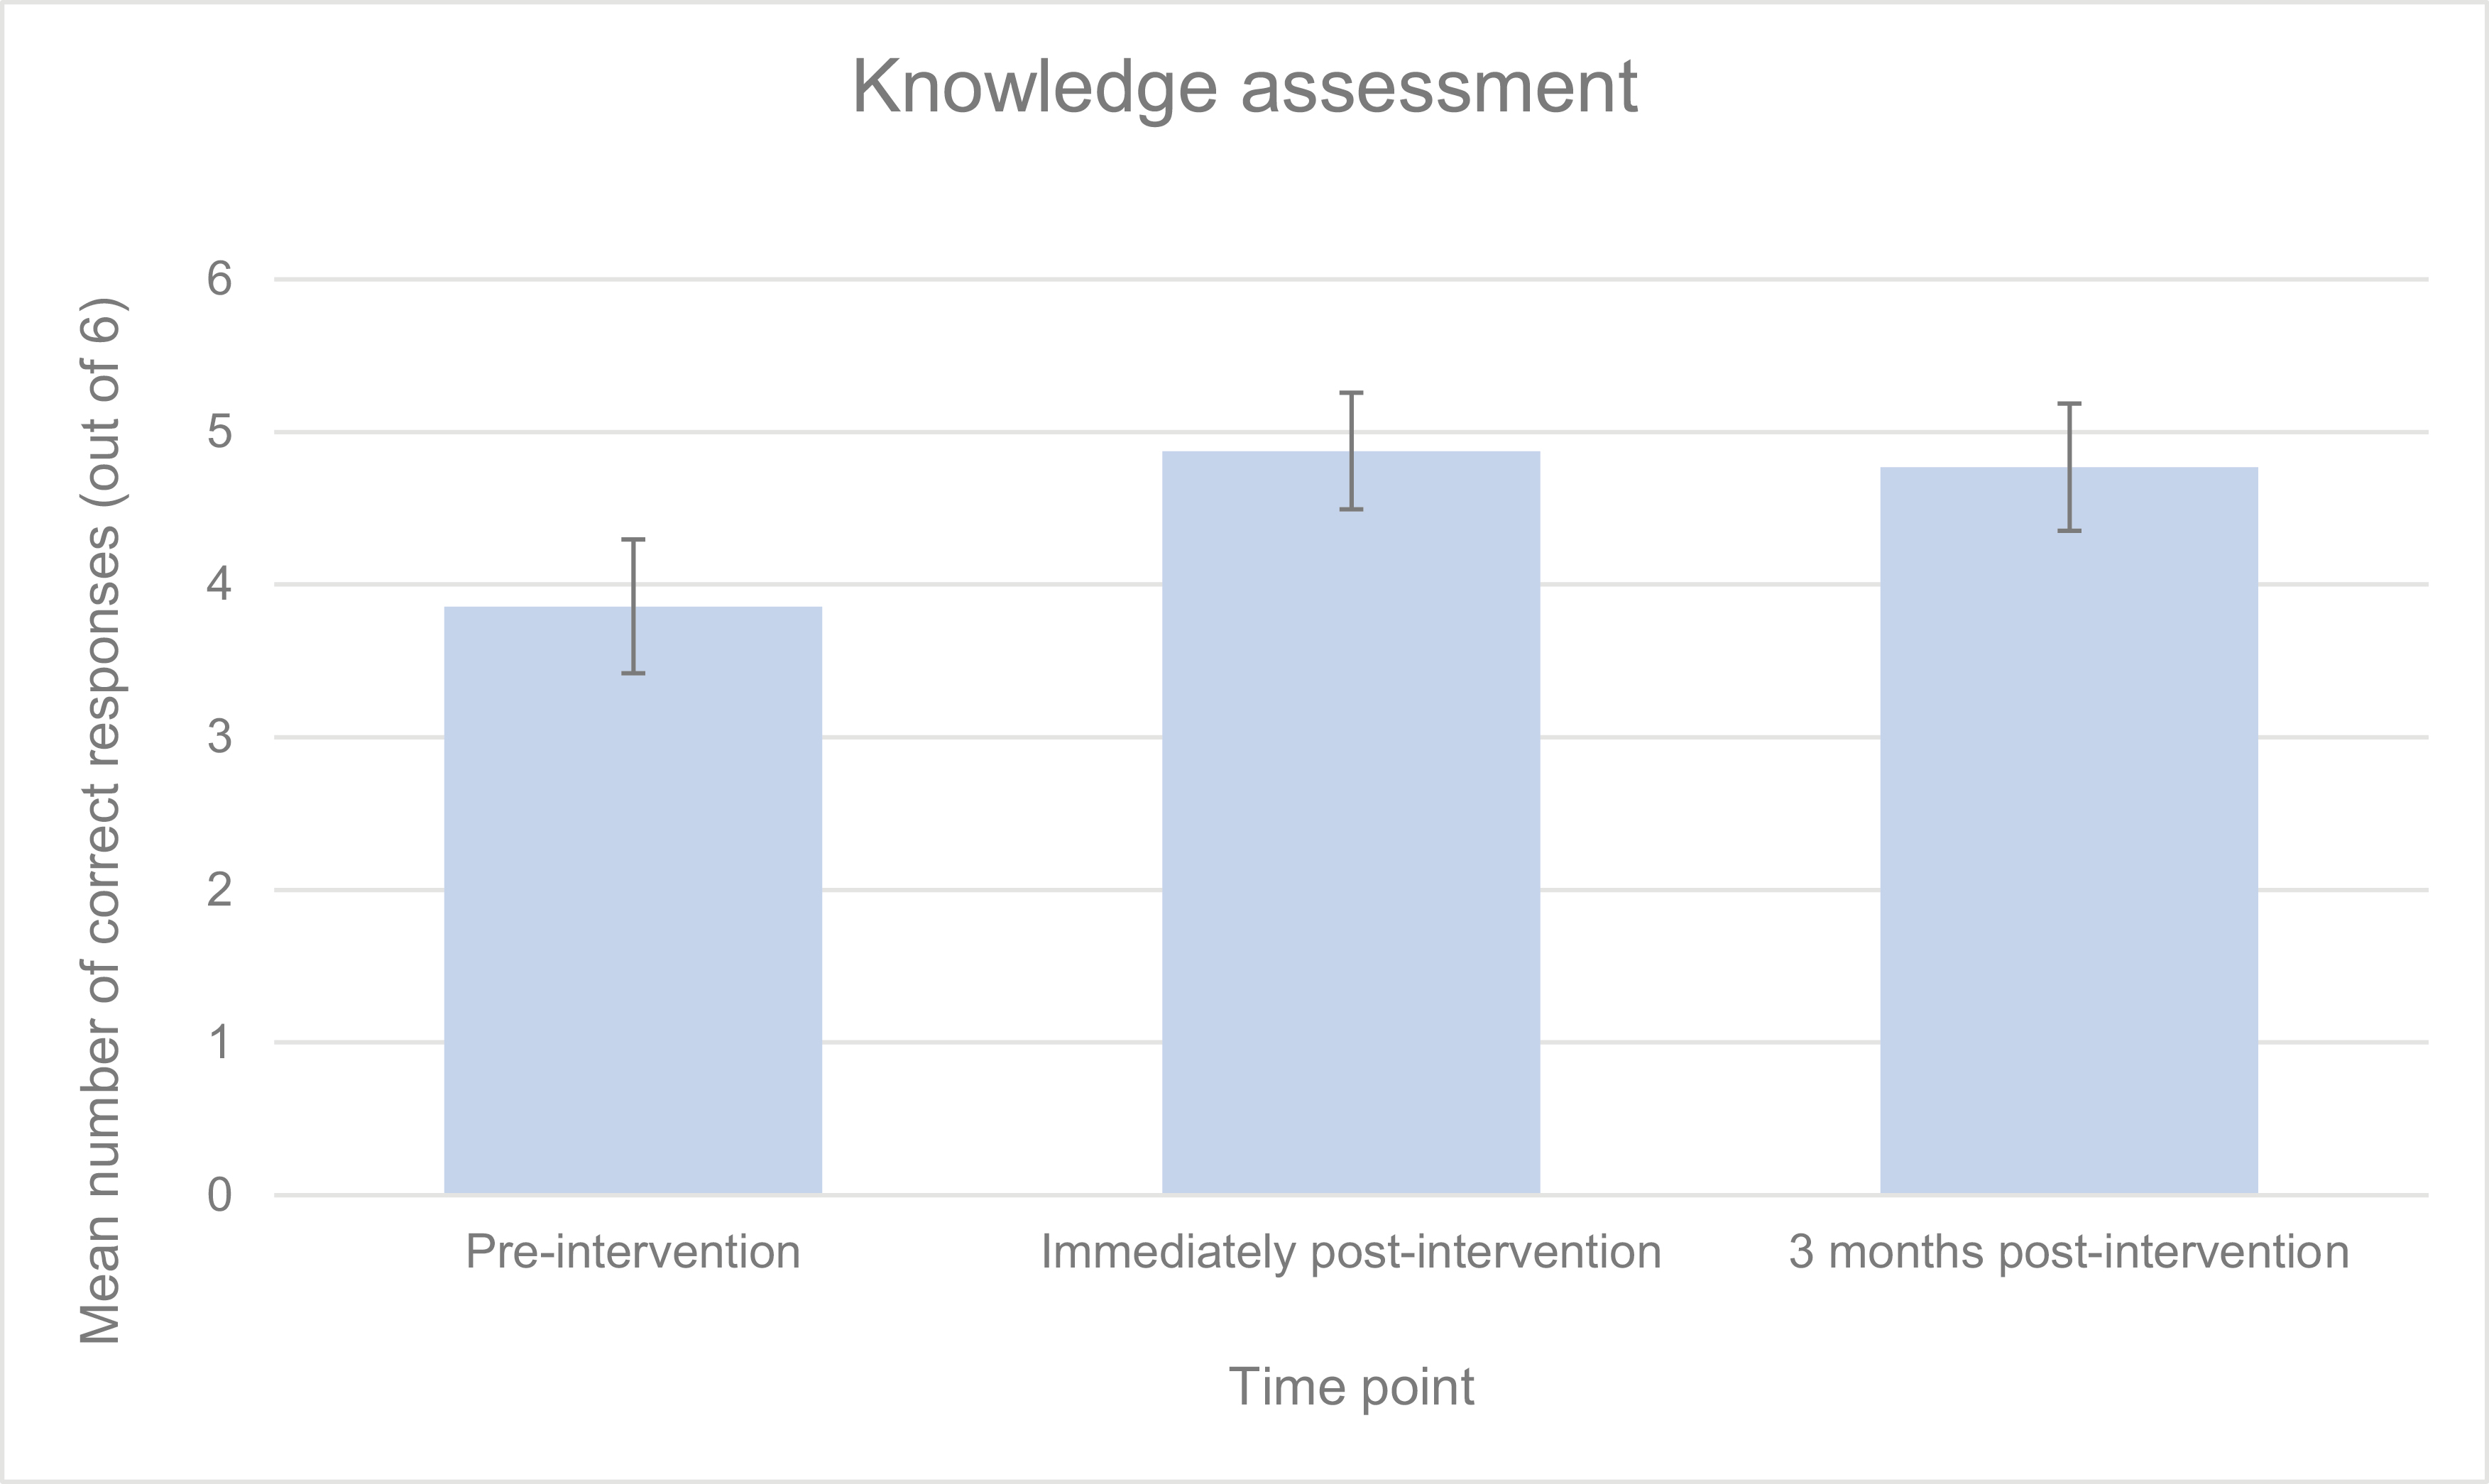 Mean number of correct responses (out of six) for knowledge assessment at each time point (with 95% confidence interval bars)